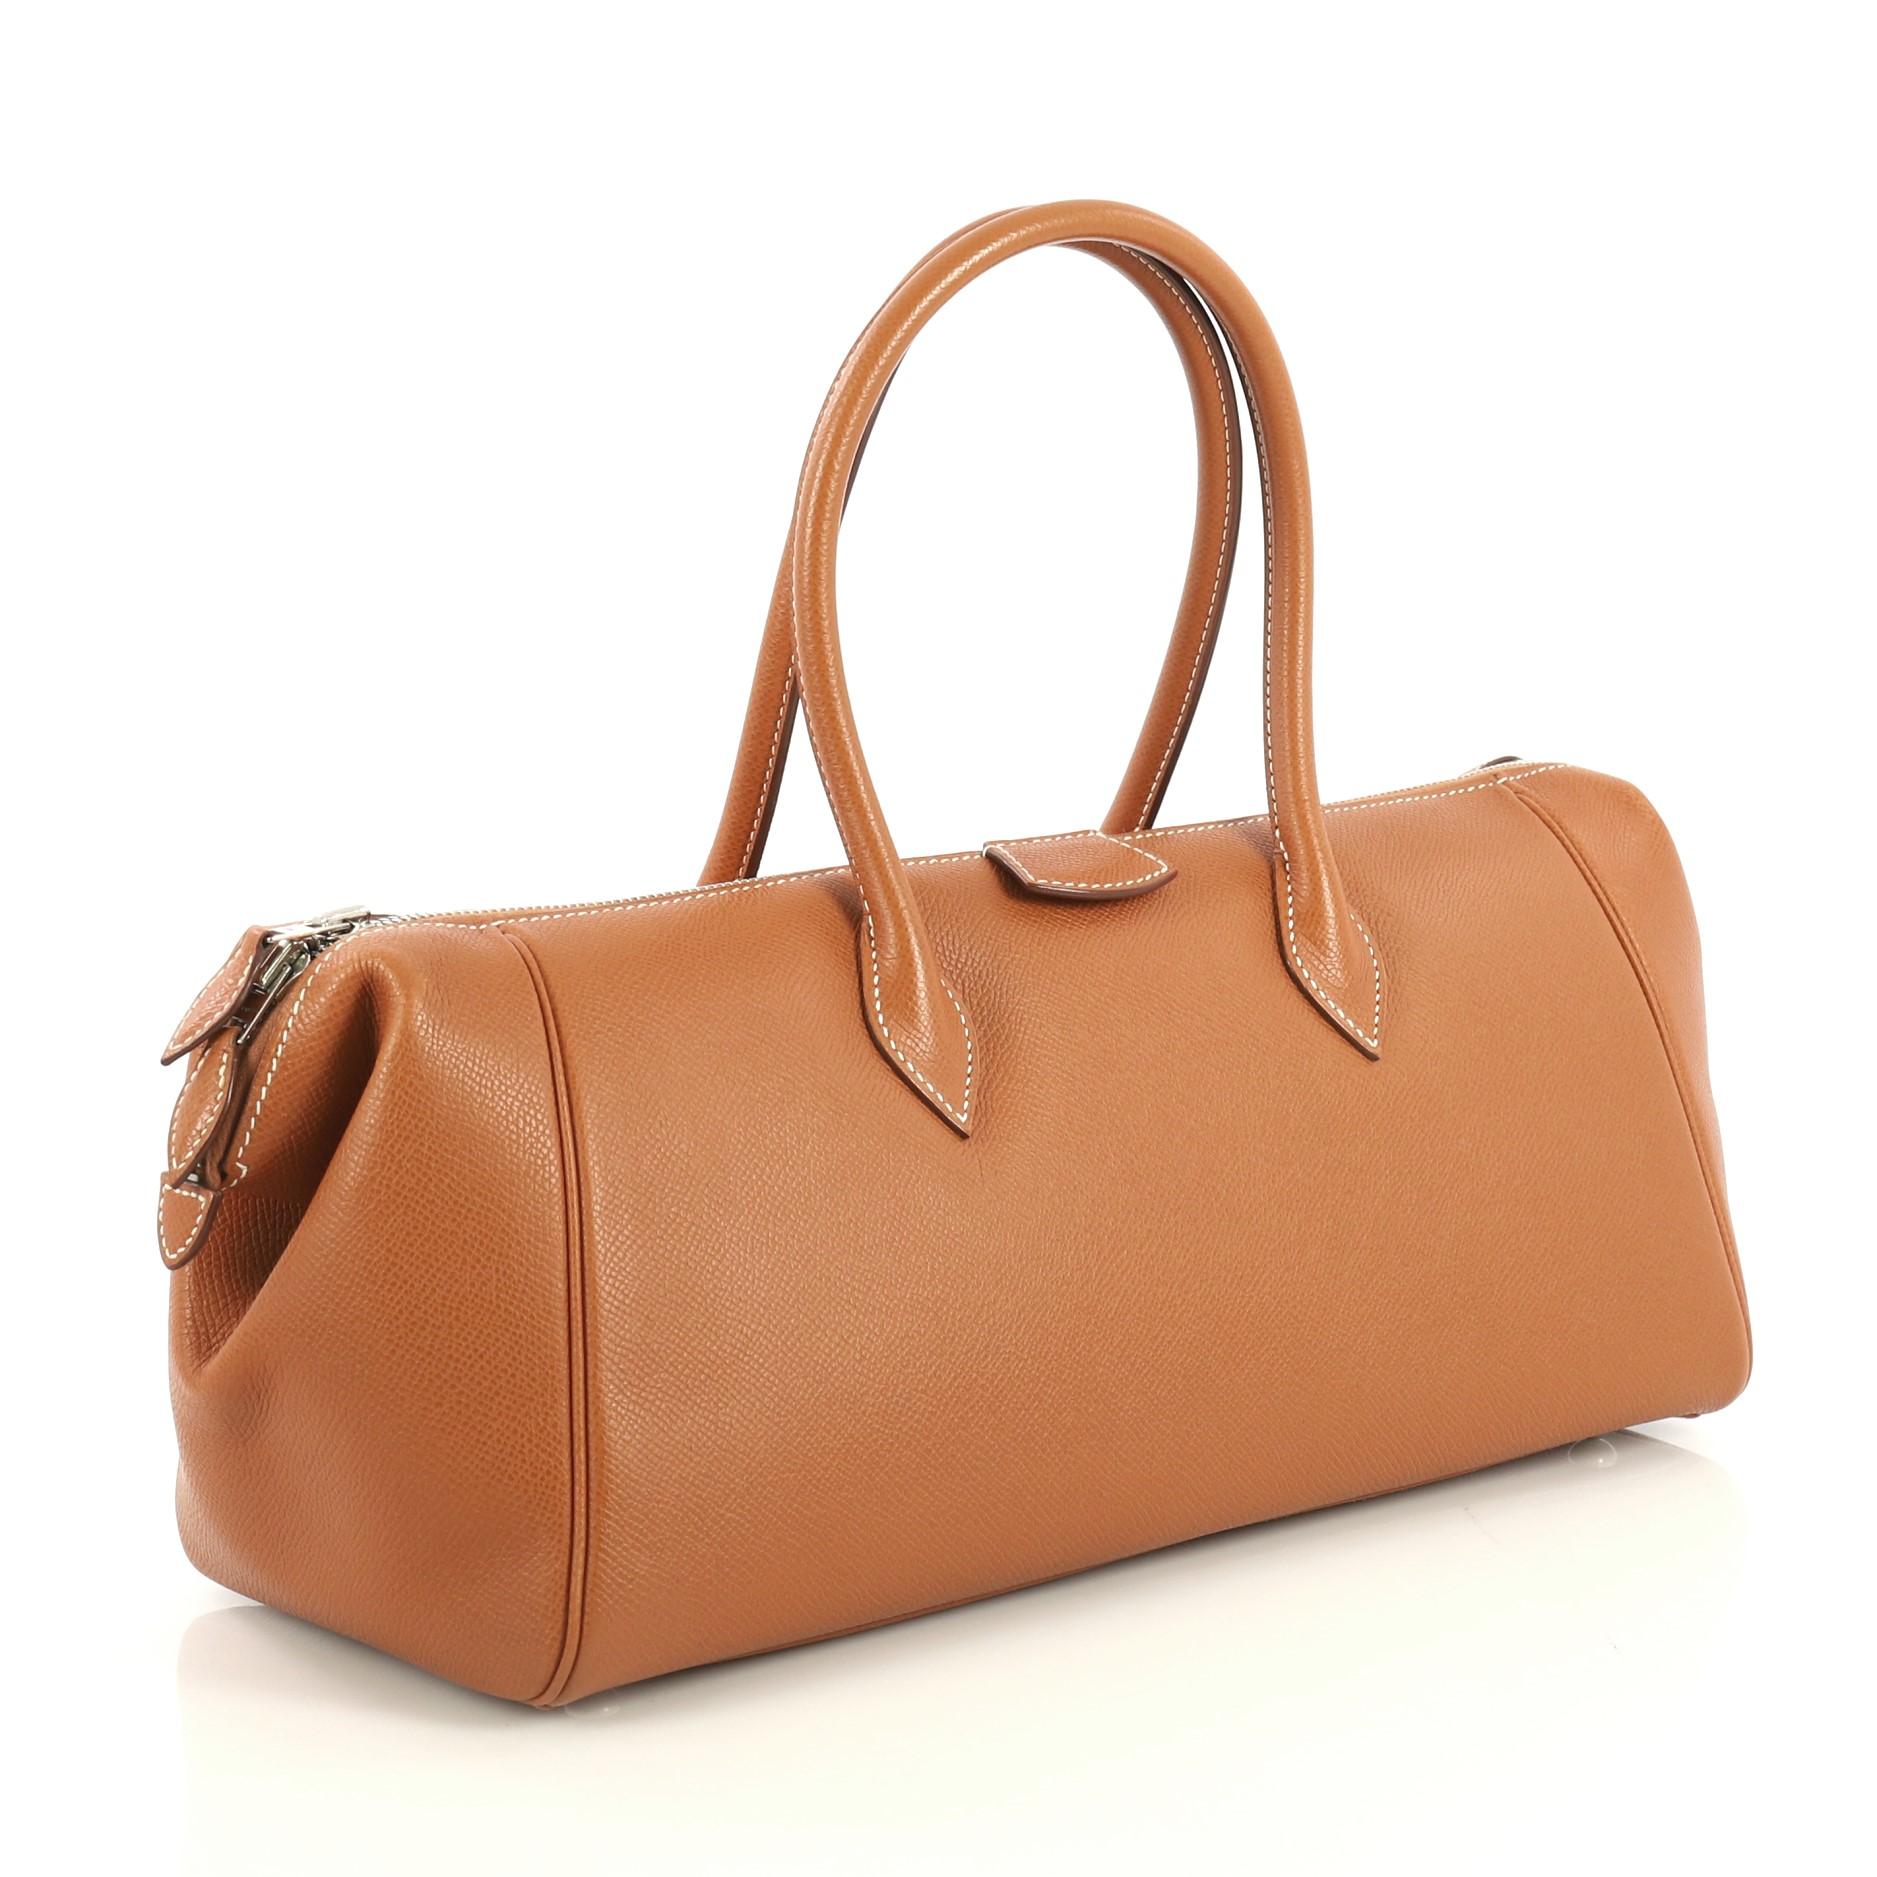 This Hermes Paris Bombay Satchel Epsom 35, crafted in Gold brown Epsom leather, features dual rolled handles and palladium hardware. Its zip closure opens to a Natural brown Agneau leather interior with slip pockets. Date stamp reads: K Square